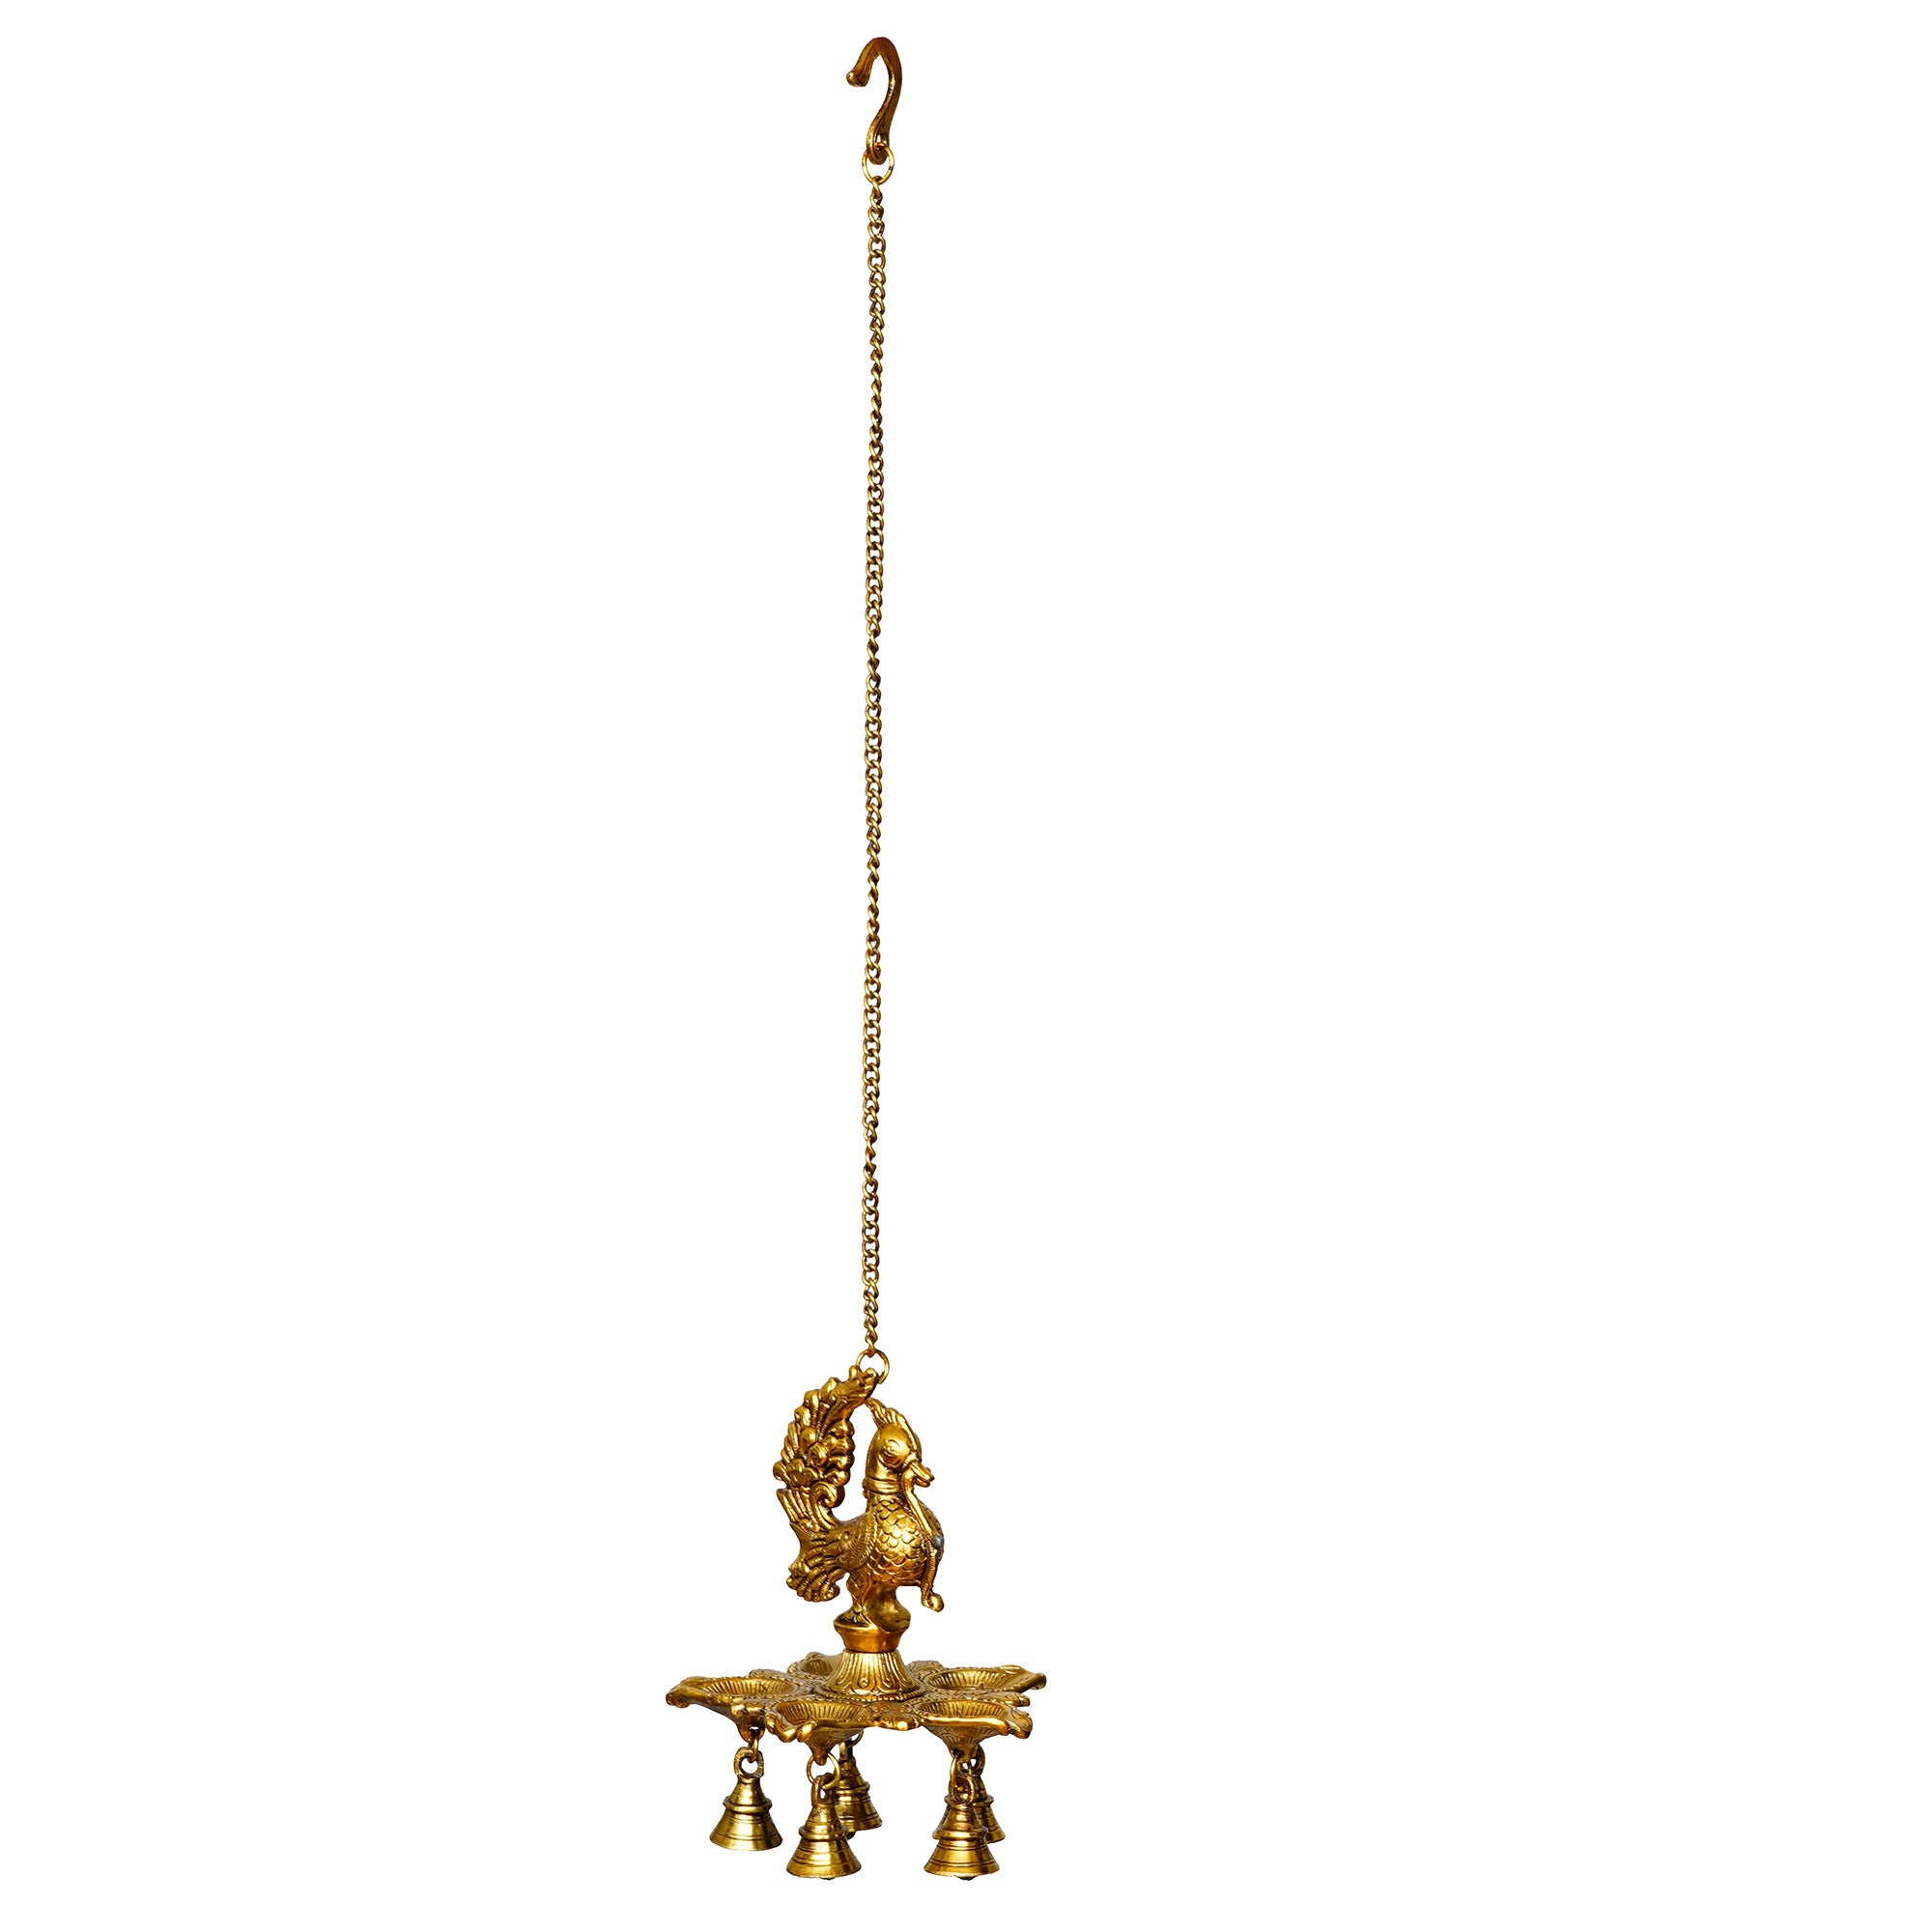 Five Wicks Decorative Peacock Diya With Bell Metal Wall Hanging With Chain 6